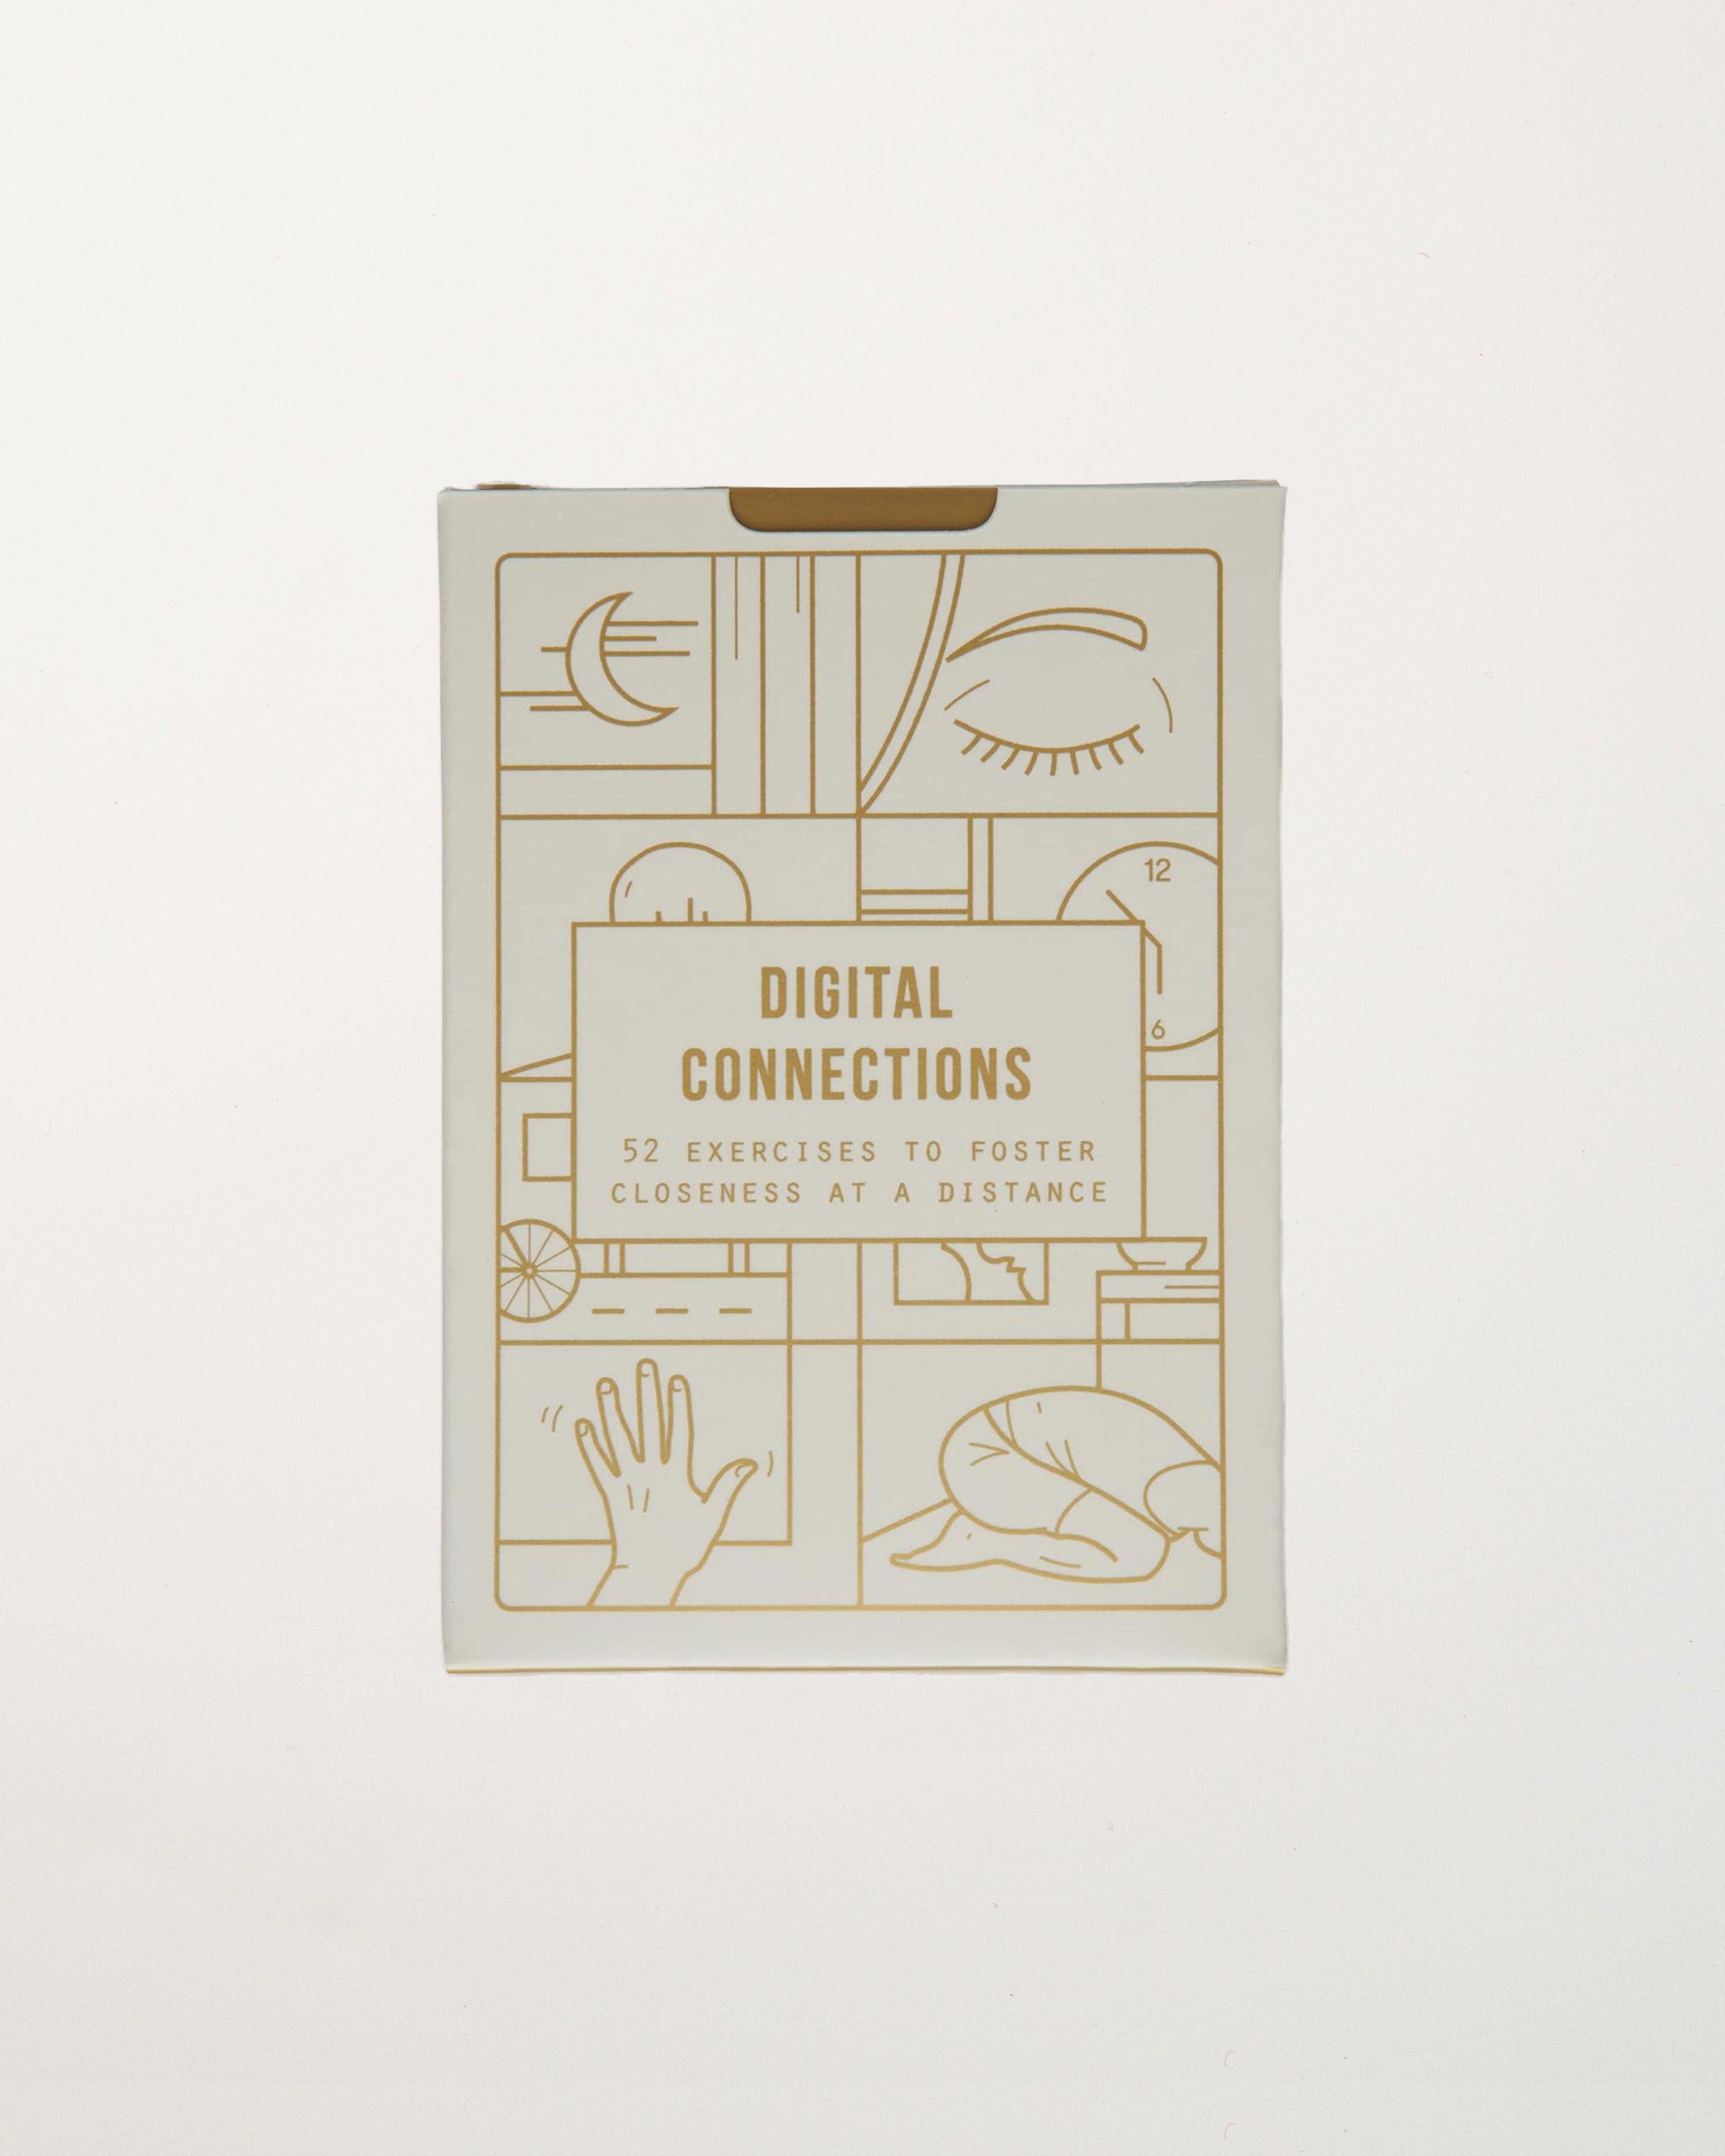 Digital connections cards